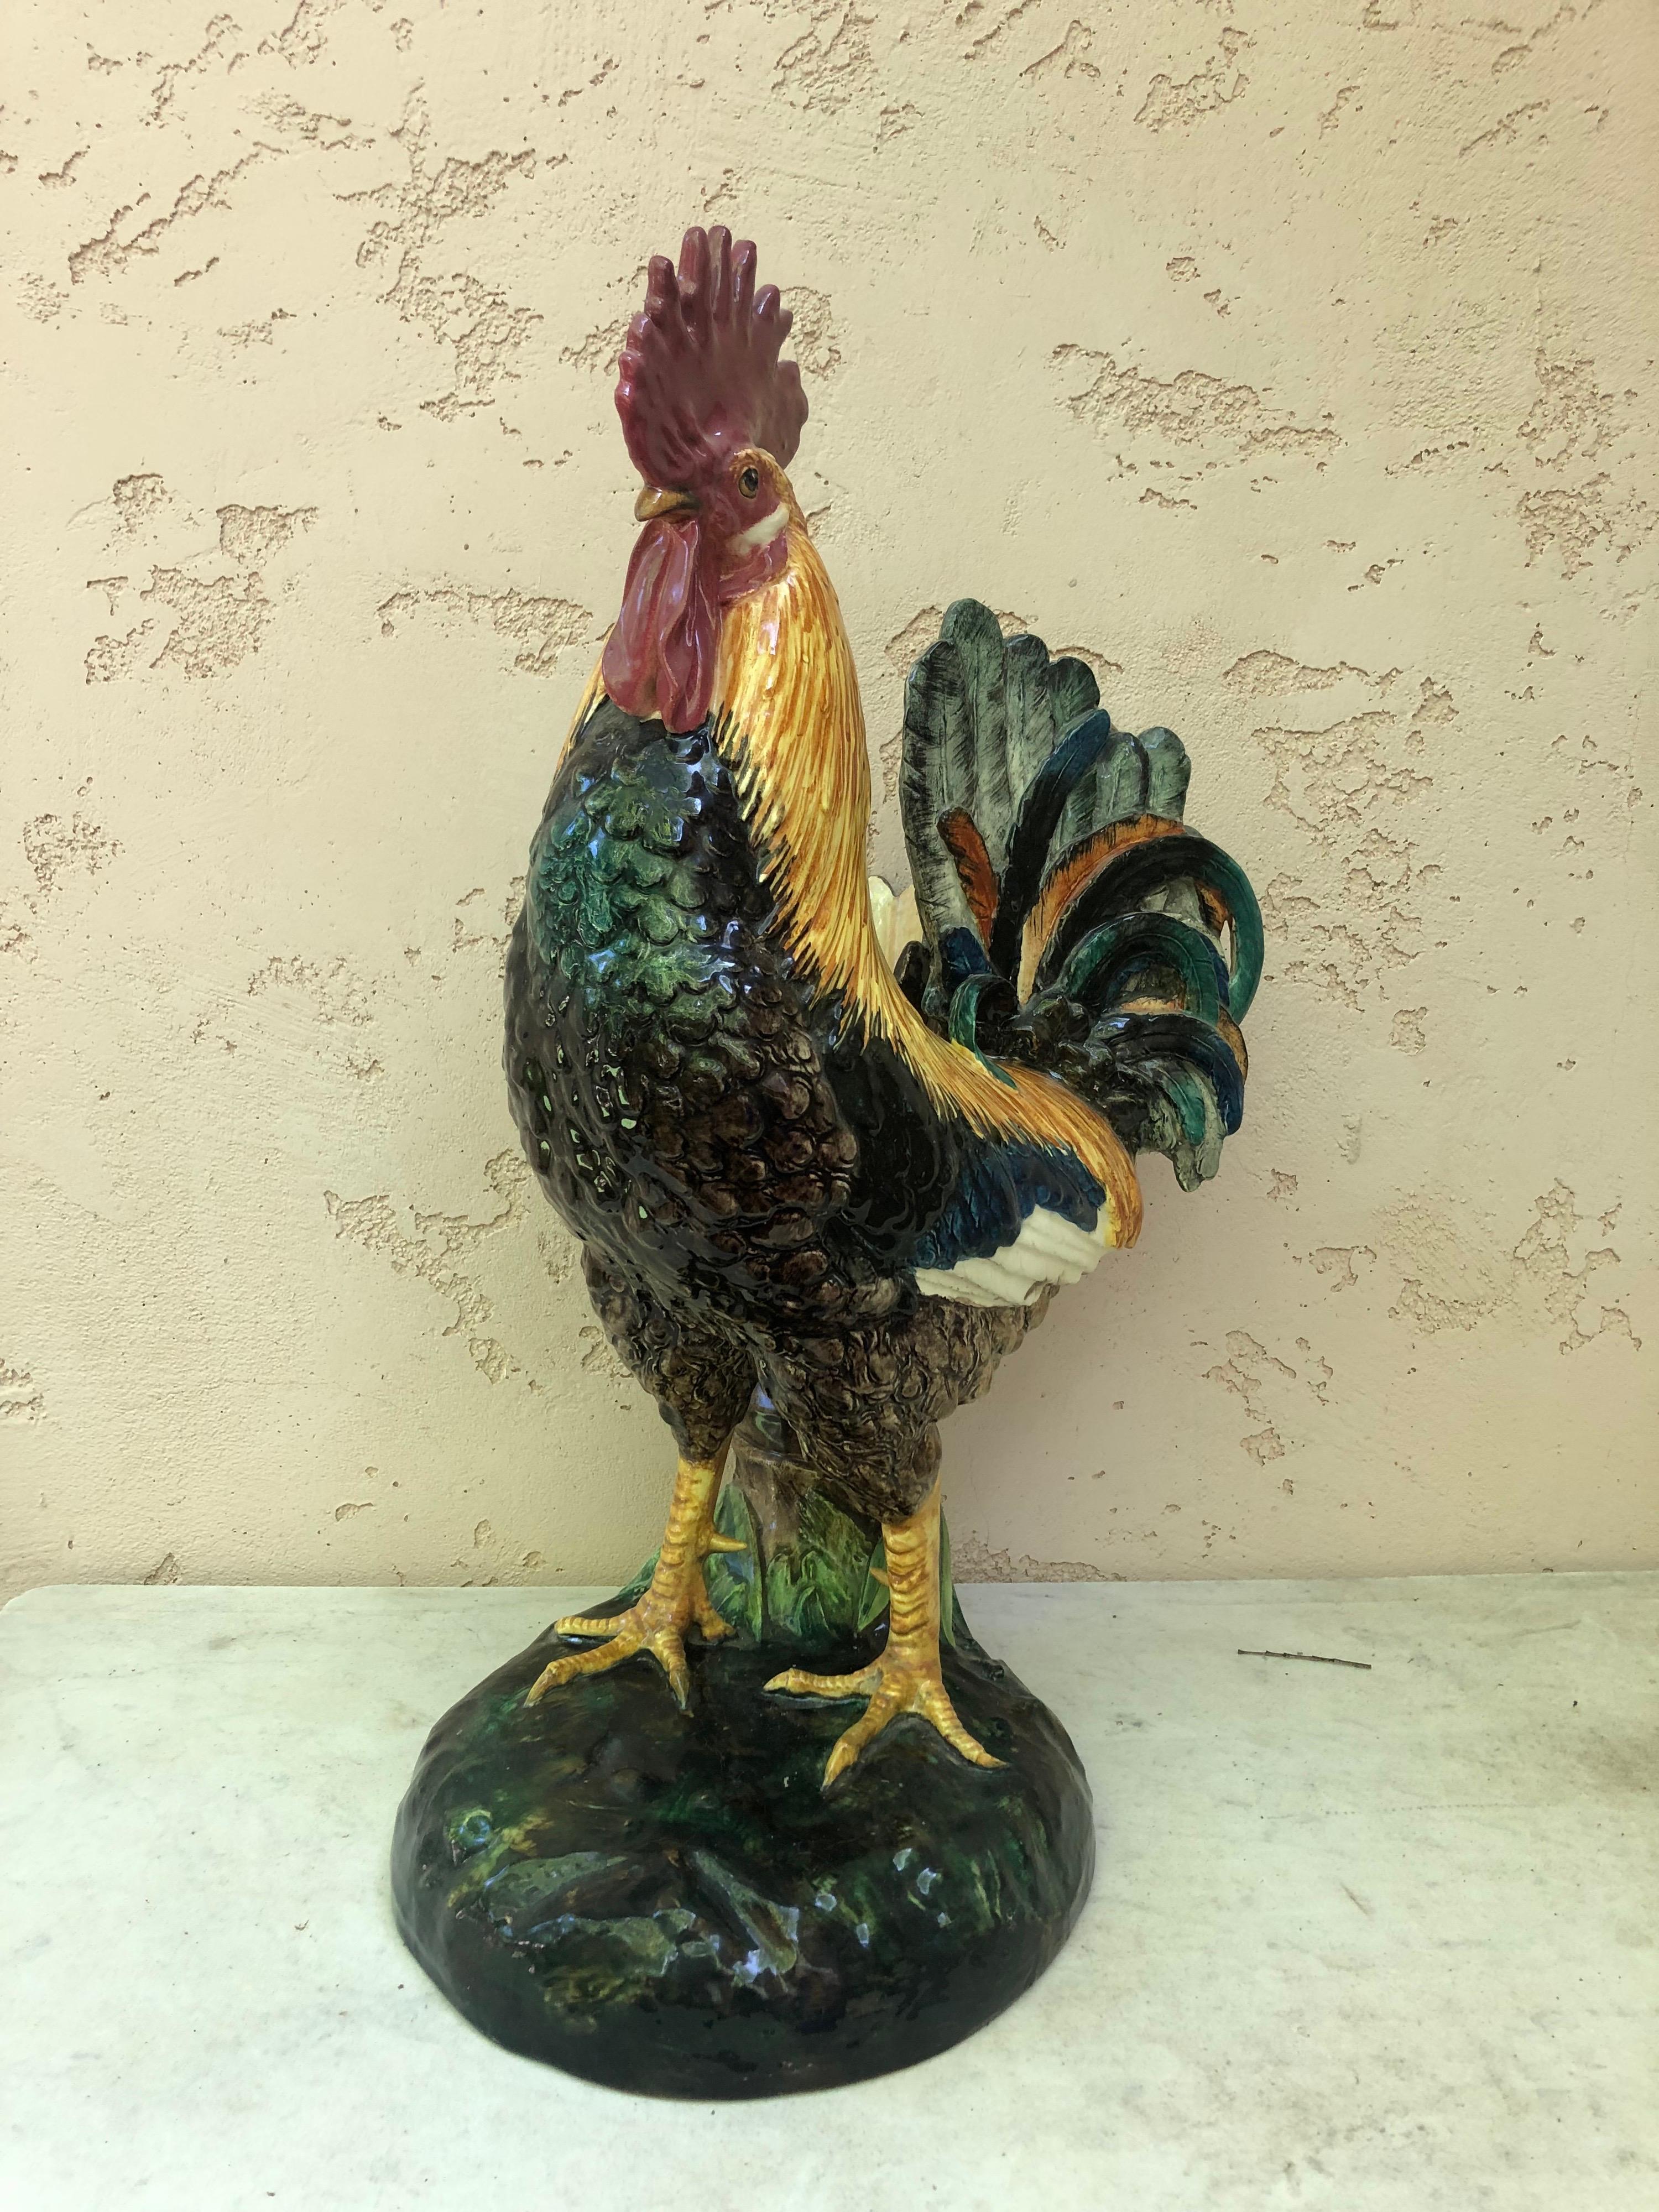 Large Majolica colorful rooster signed Delphin Massier circa 1890.
On the back of the rooster, a rare brown bamboo vase, usually the vase is a trunk.